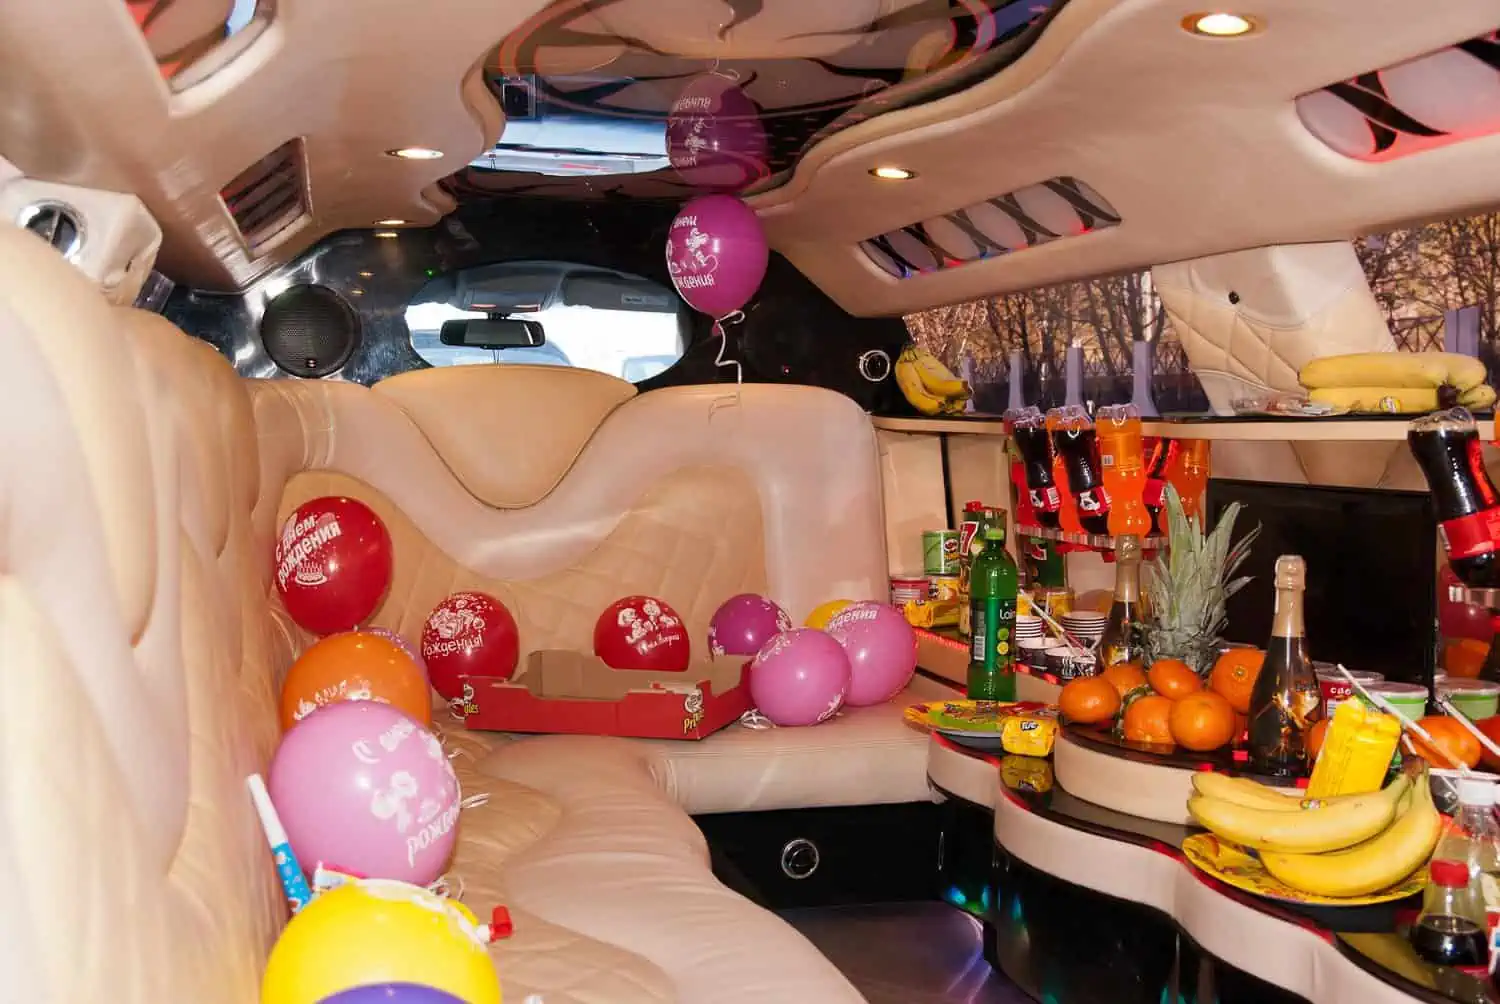 Party decorations in the limousine